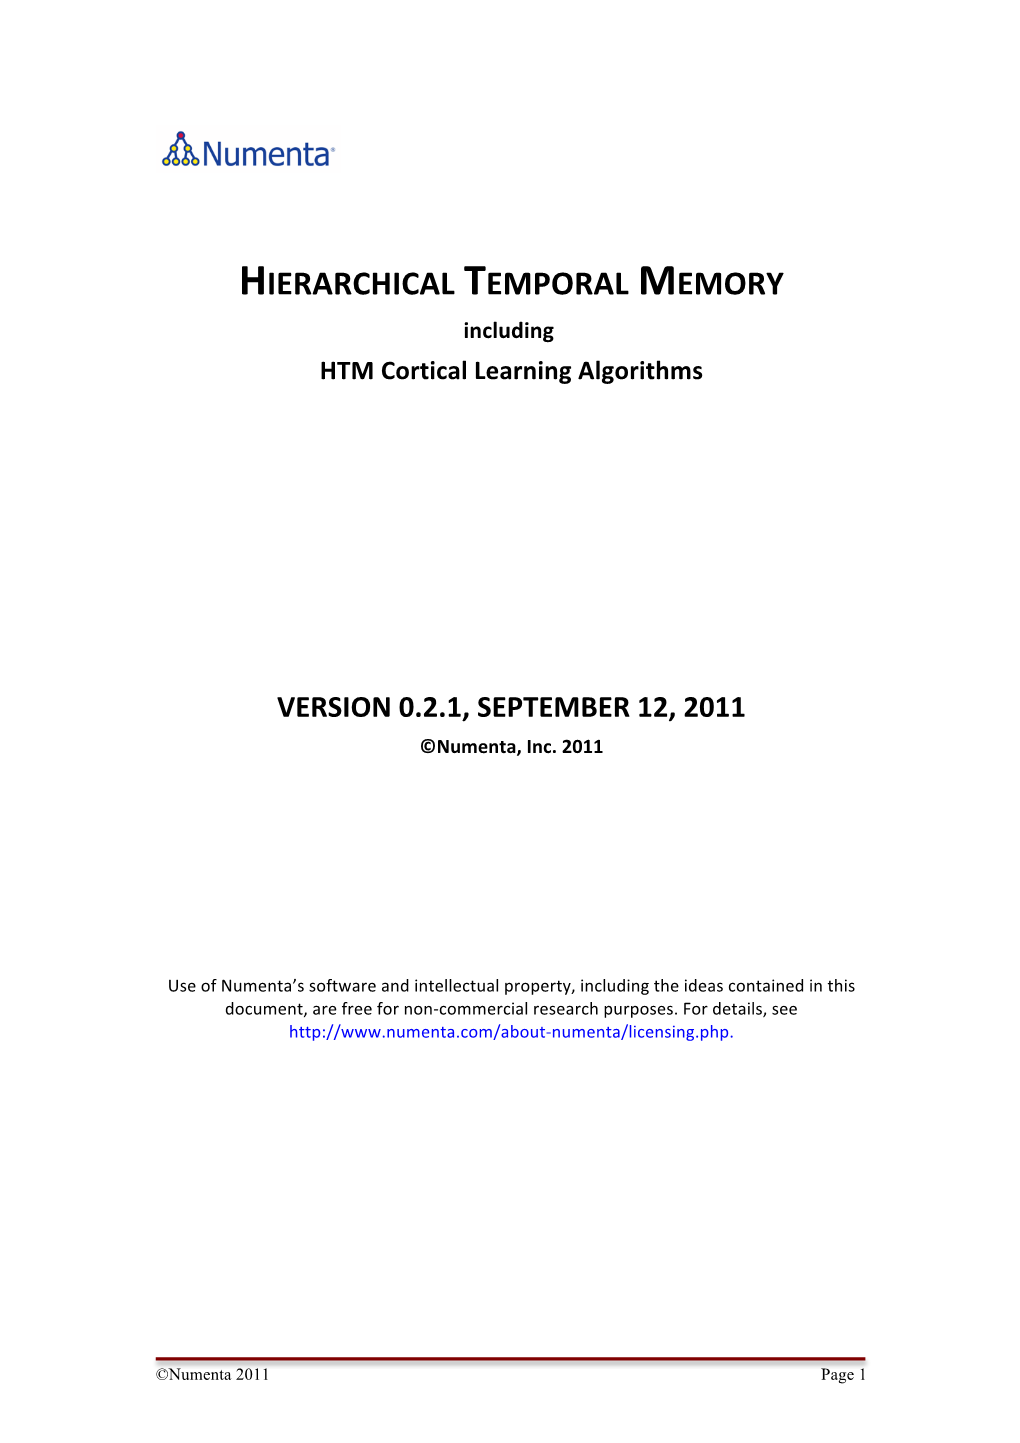 HIERARCHICAL TEMPORAL MEMORY Including HTM Cortical Learning Algorithms